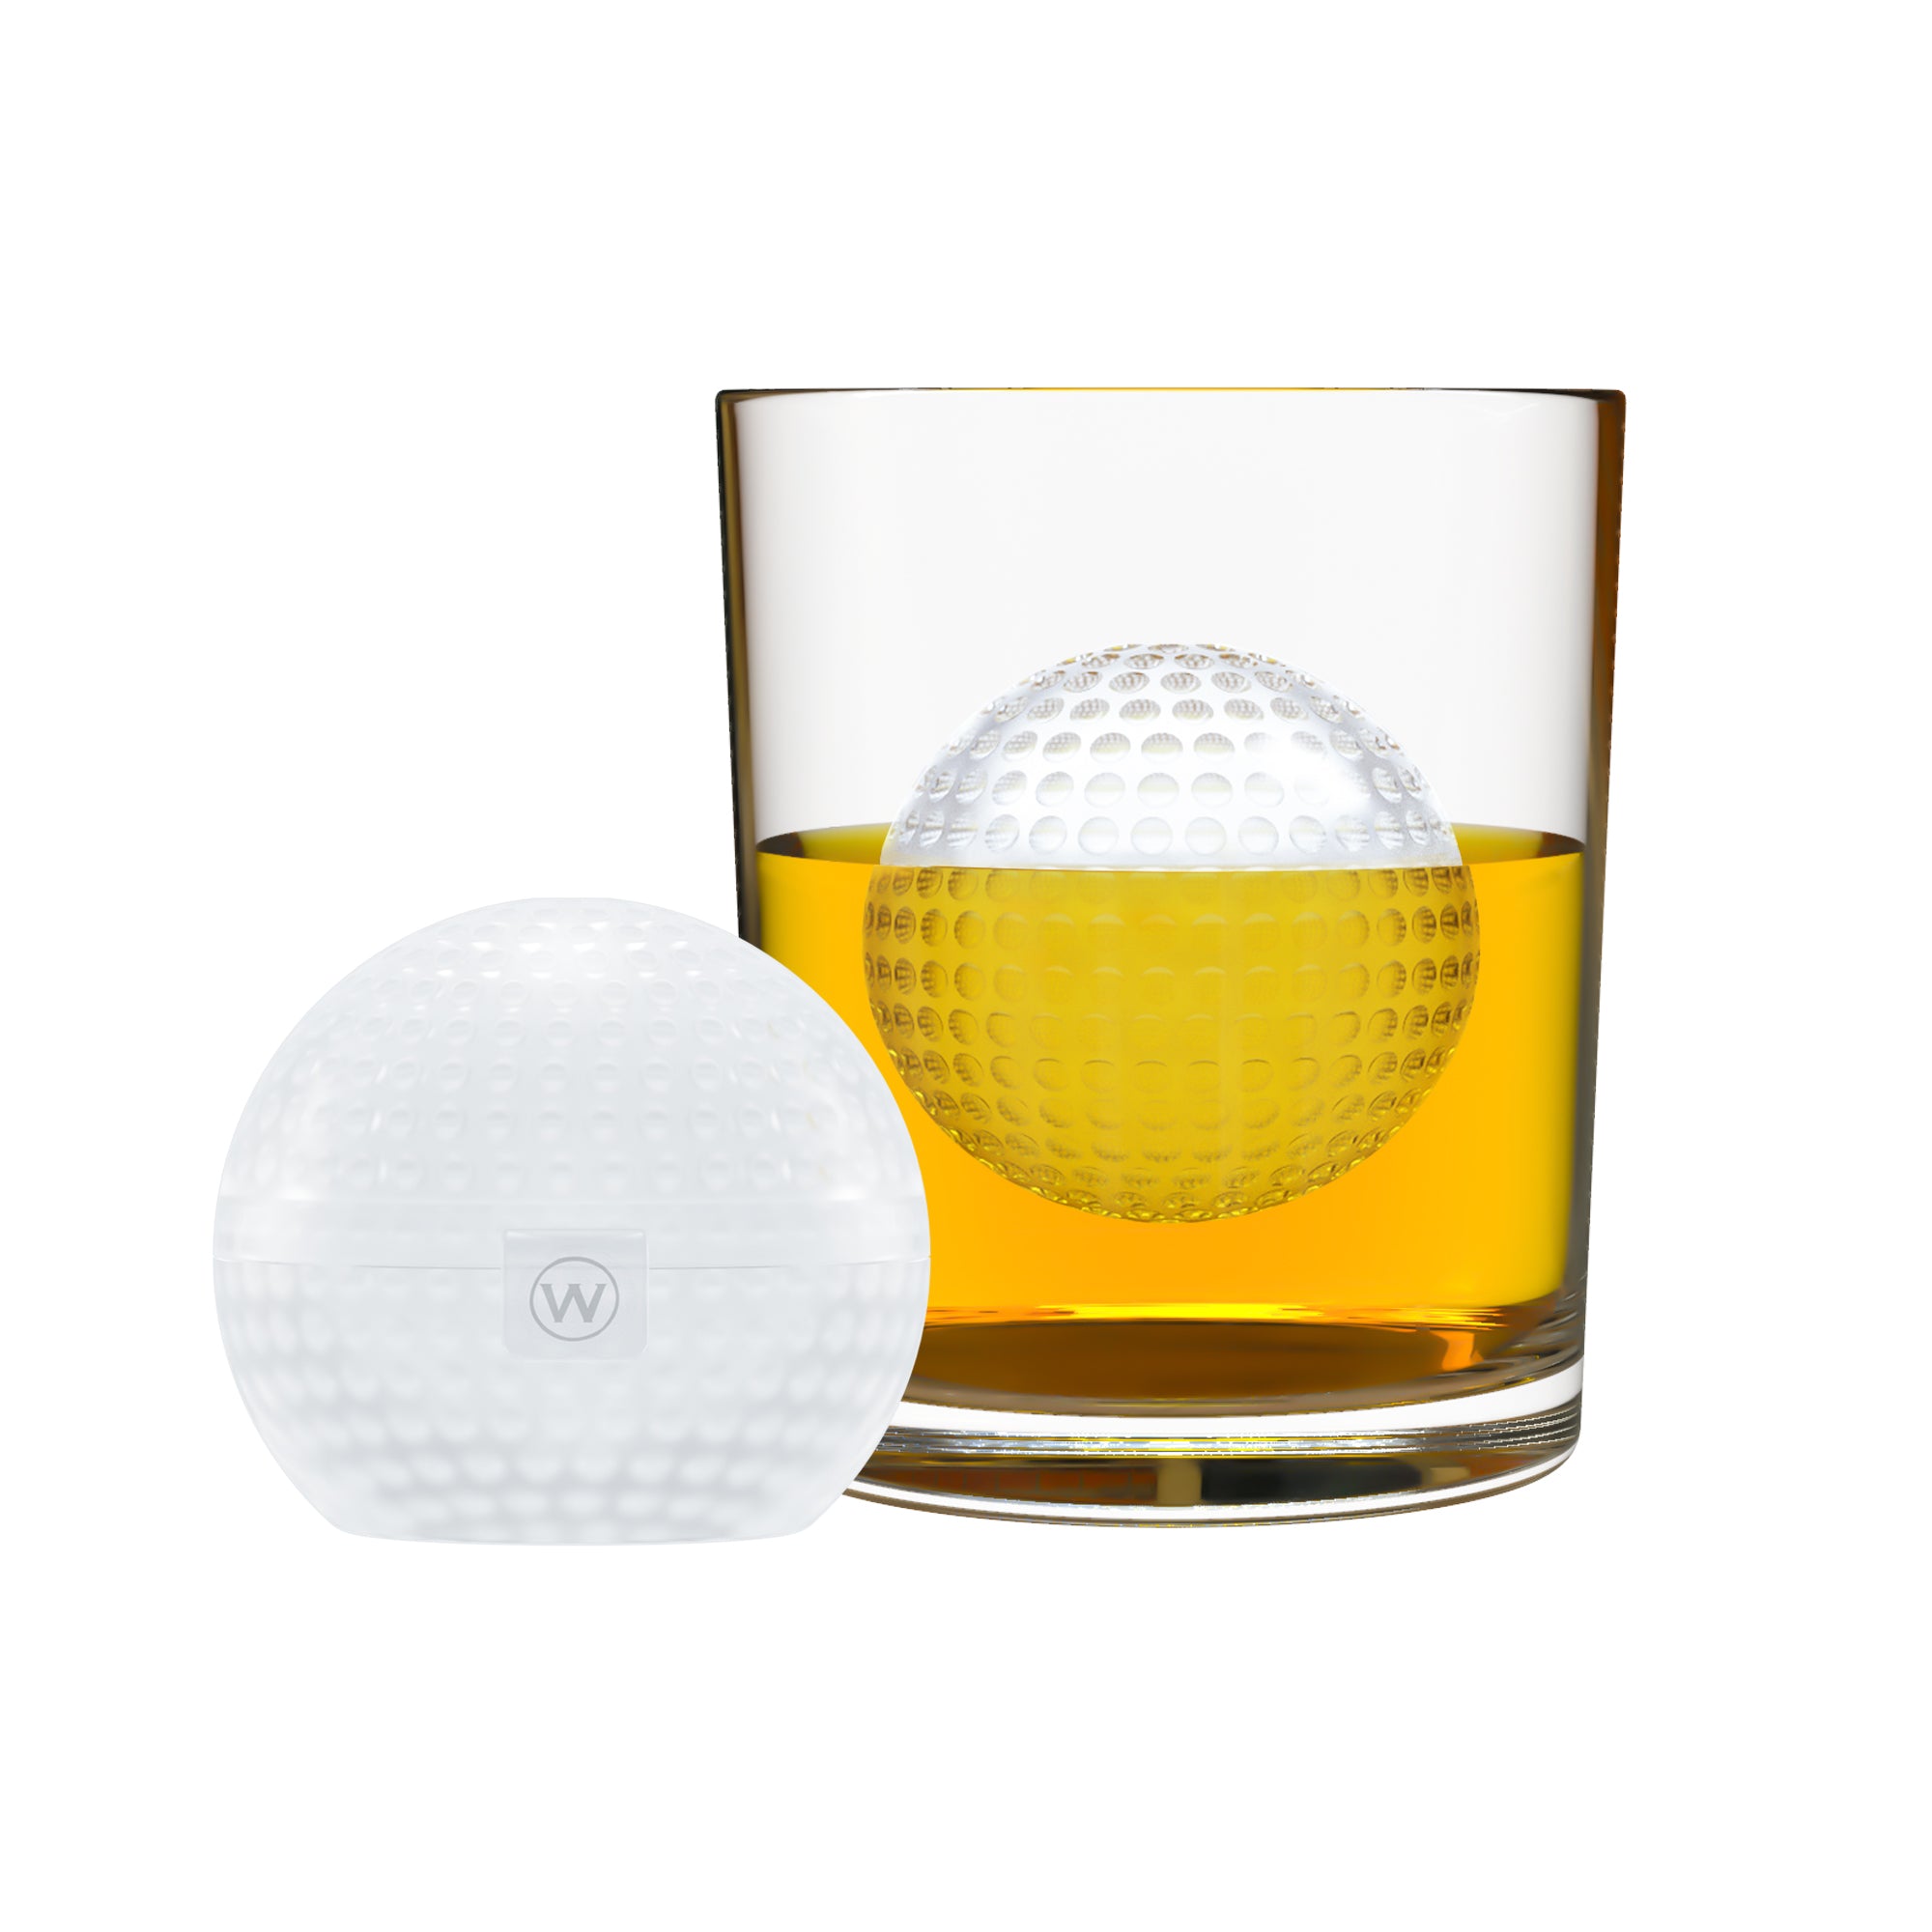 Golf Ball Ice Molds, Sphere Ice Mold for Golfers, Slow-Melting Ice for  Whisky & Spirits, Golf Ball Ice Novelty Drink Molds 